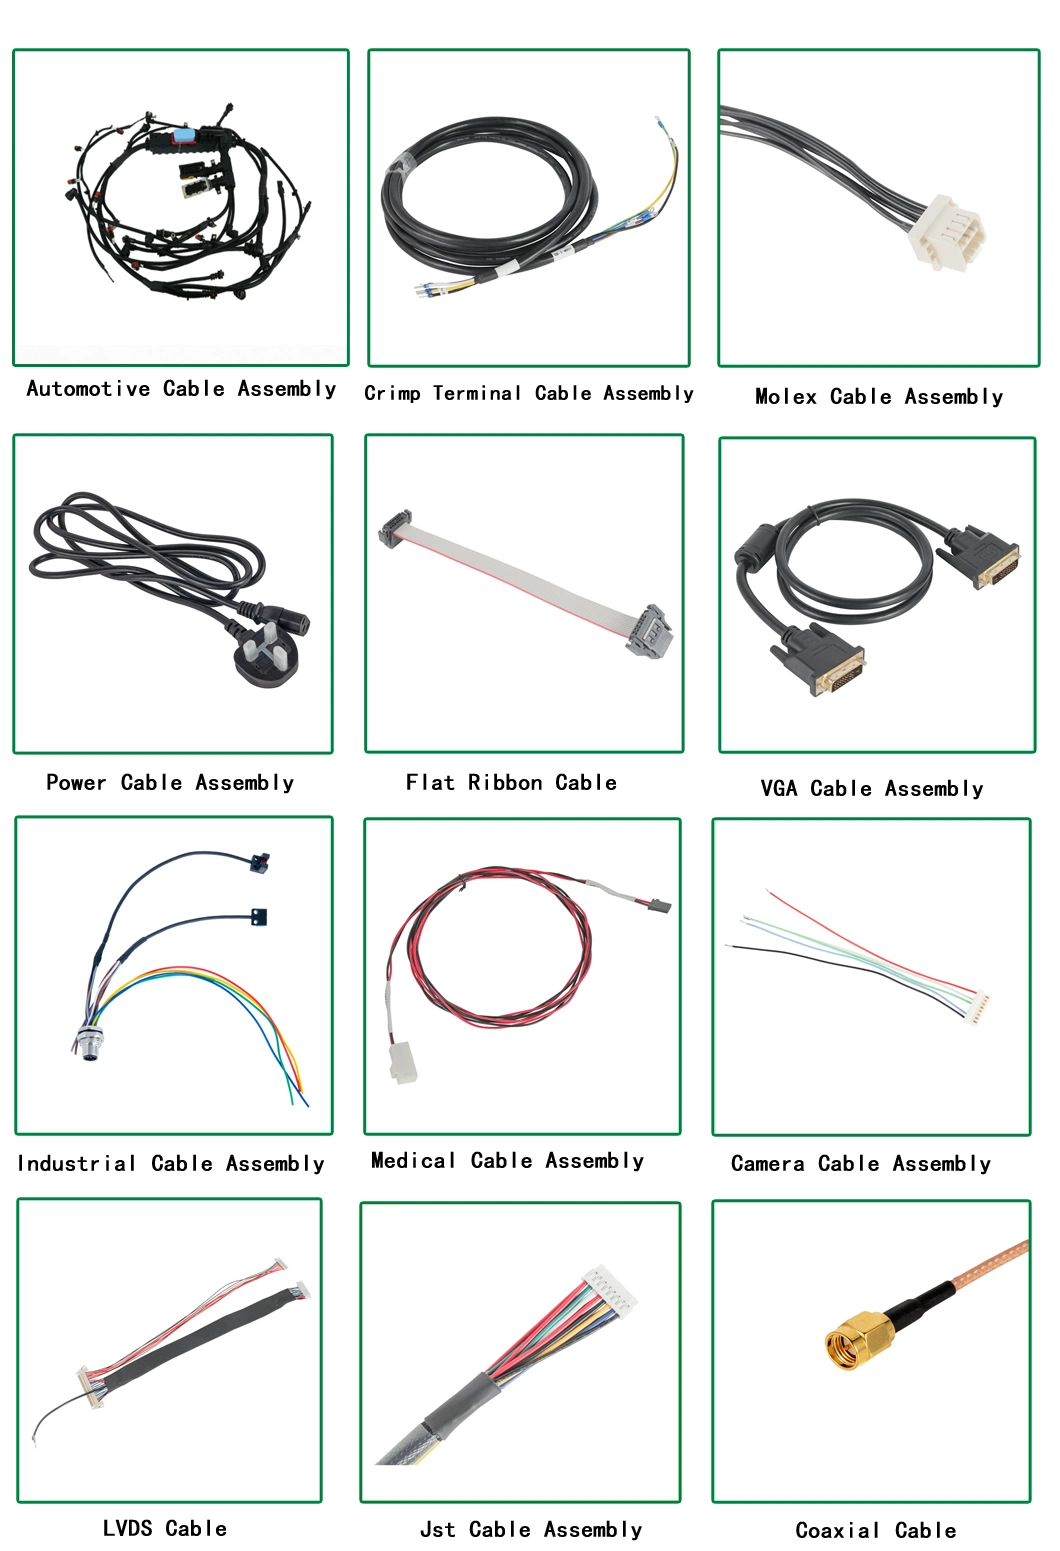 Automotive Wiring Harnesses Grounding Wire Copper DC Solar Battery Power Cable